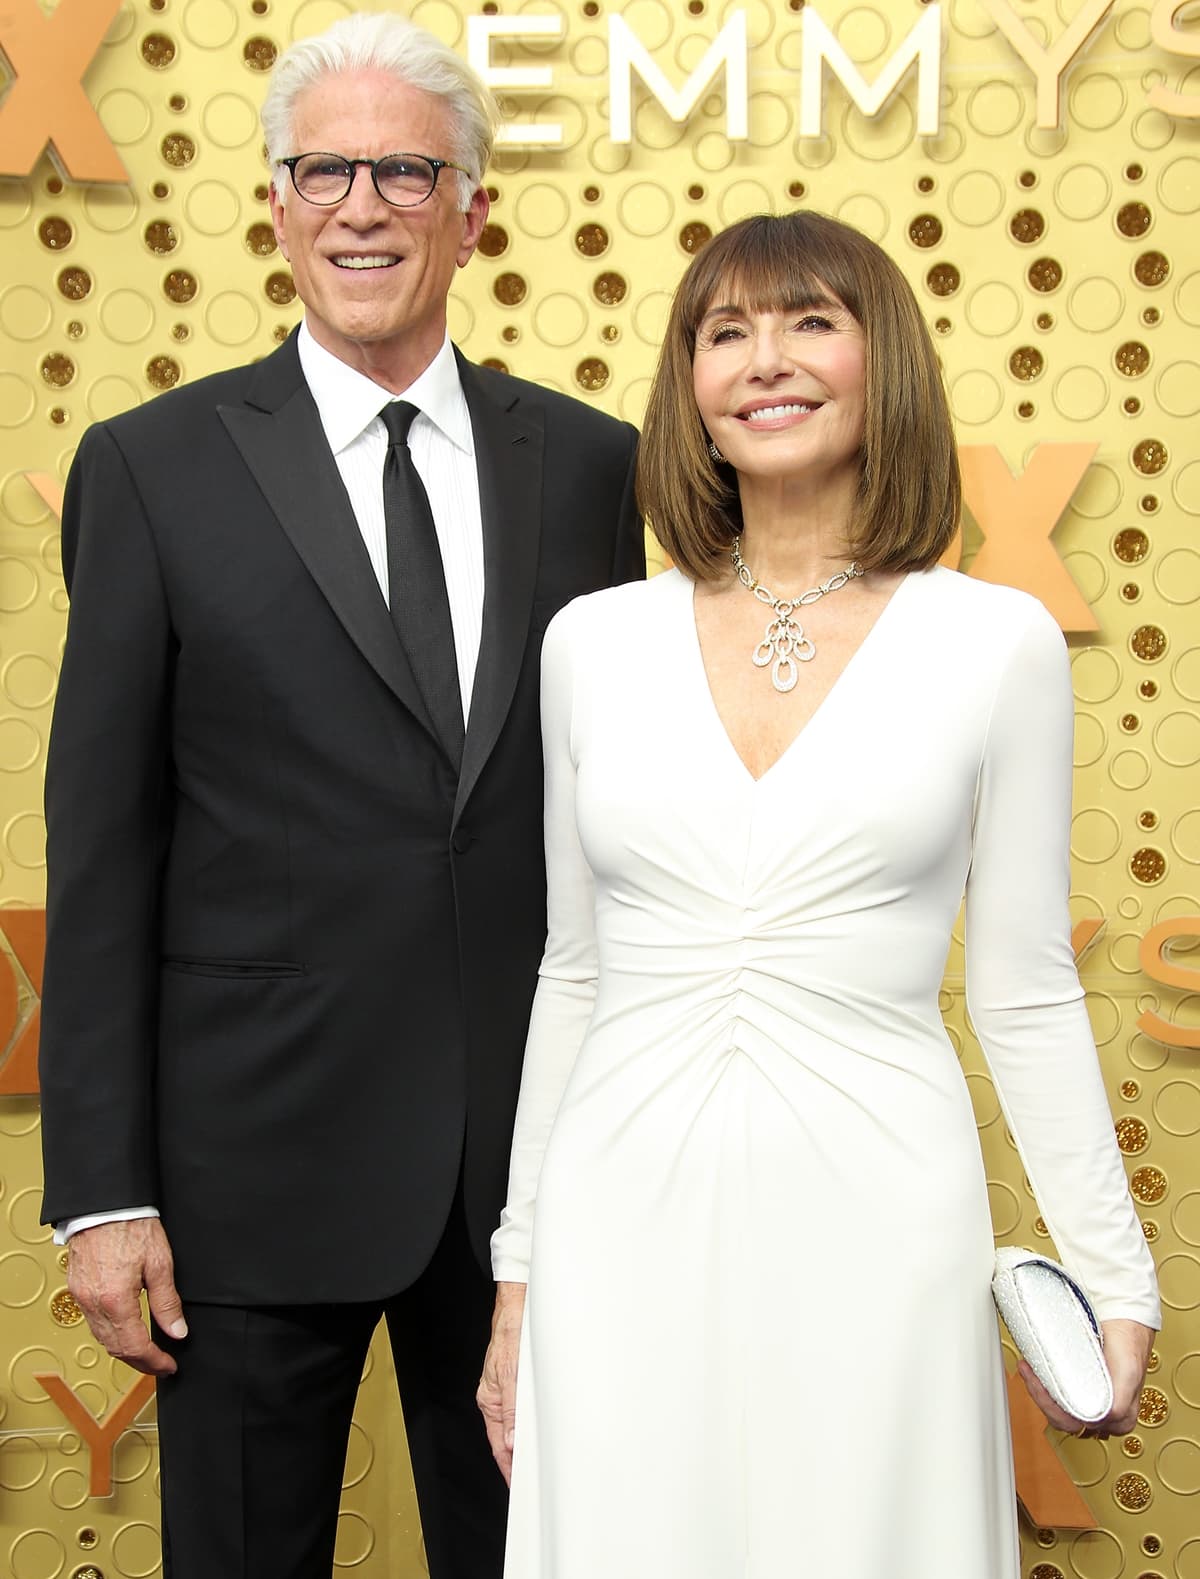 Mary Steenburgen and her husband Ted Danson celebrated 25 years of marriage in 2020